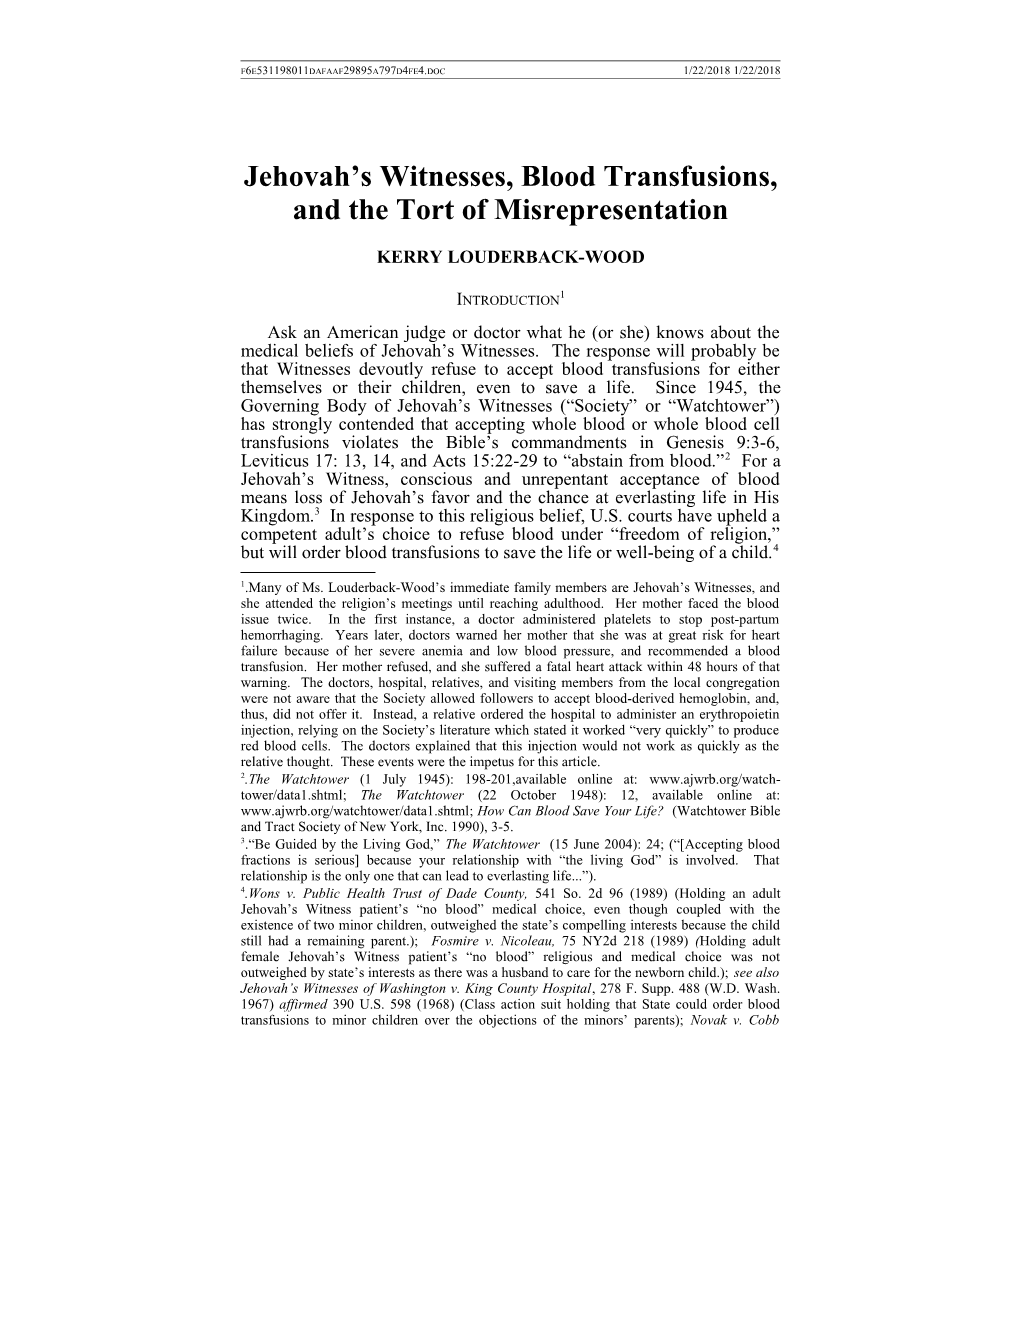 Jehovah S Witnesses, Blood Transfusions, and the Tort of Misrepresentation